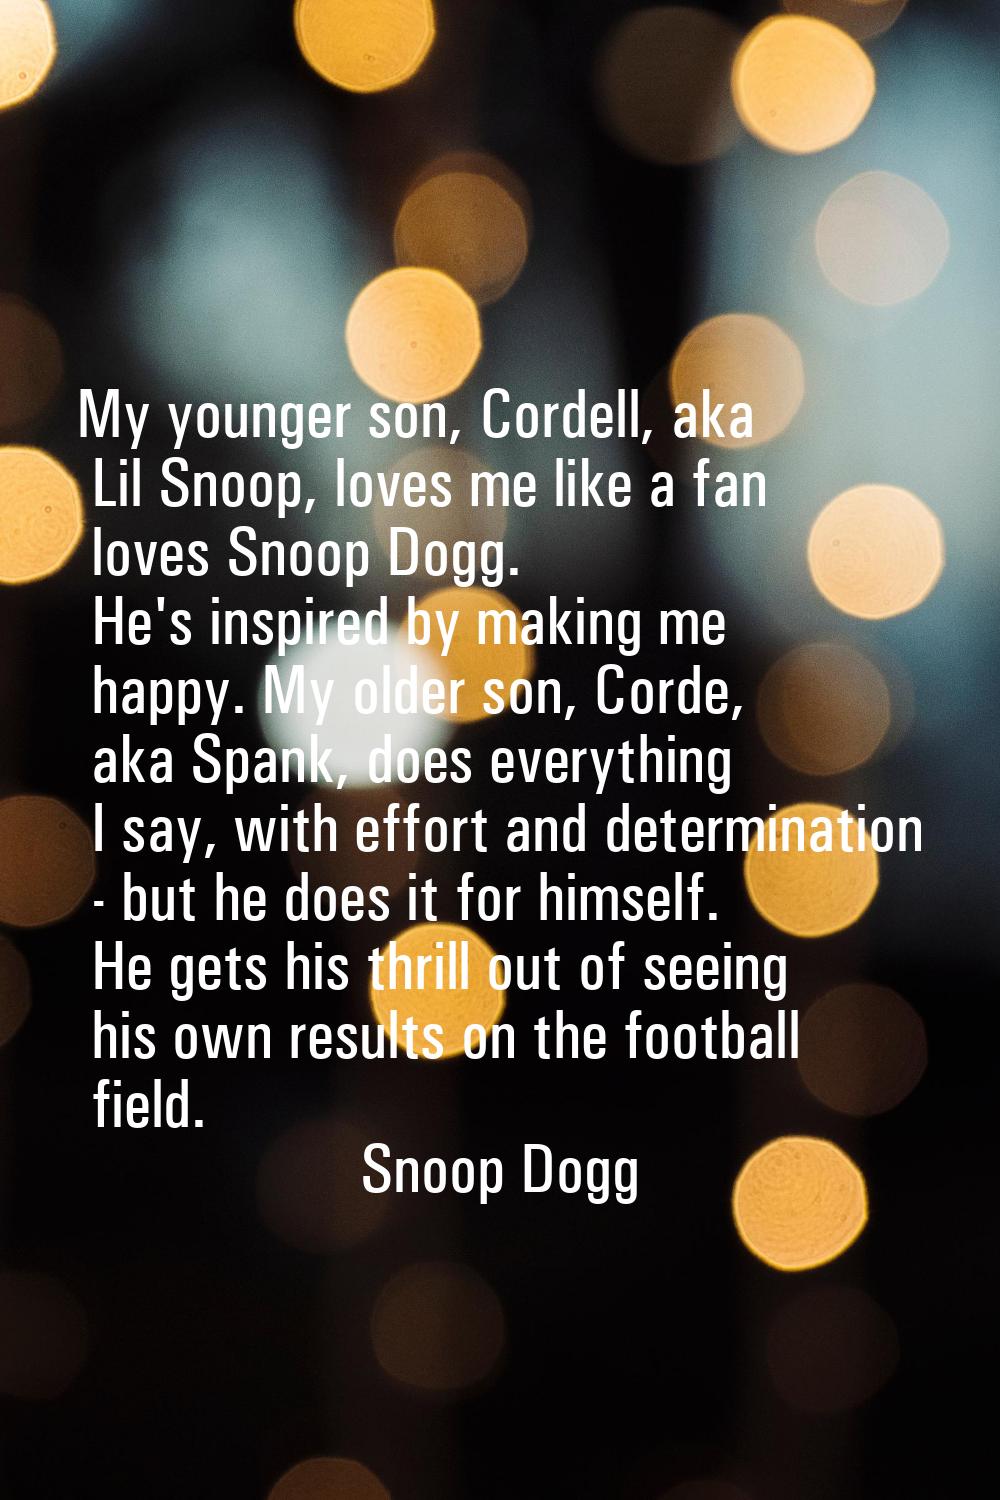 My younger son, Cordell, aka Lil Snoop, loves me like a fan loves Snoop Dogg. He's inspired by maki